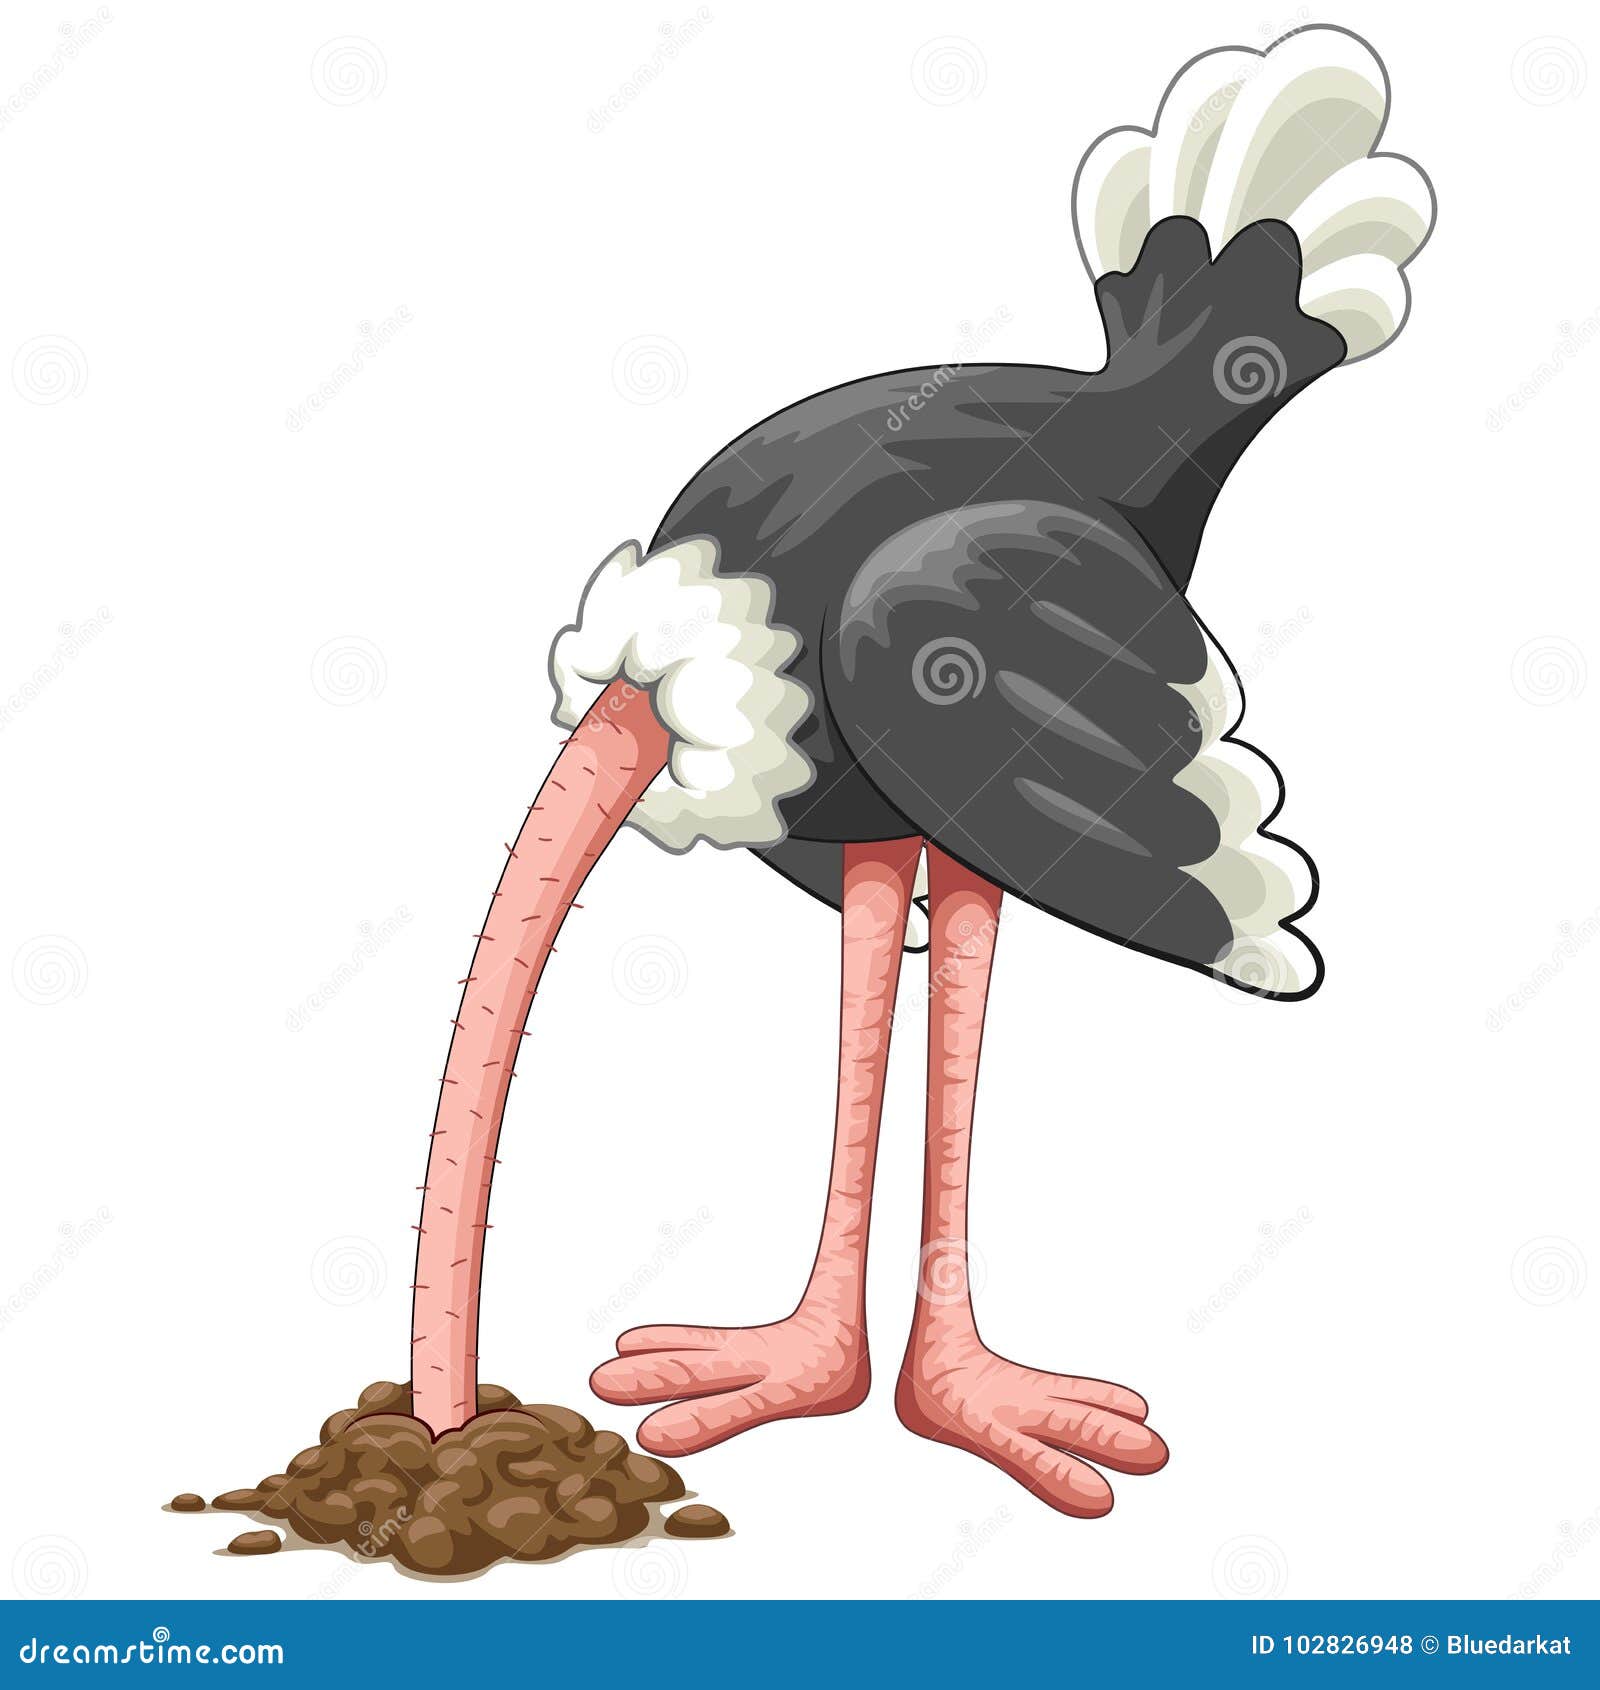 ostrich head in sand proverb cartoon character